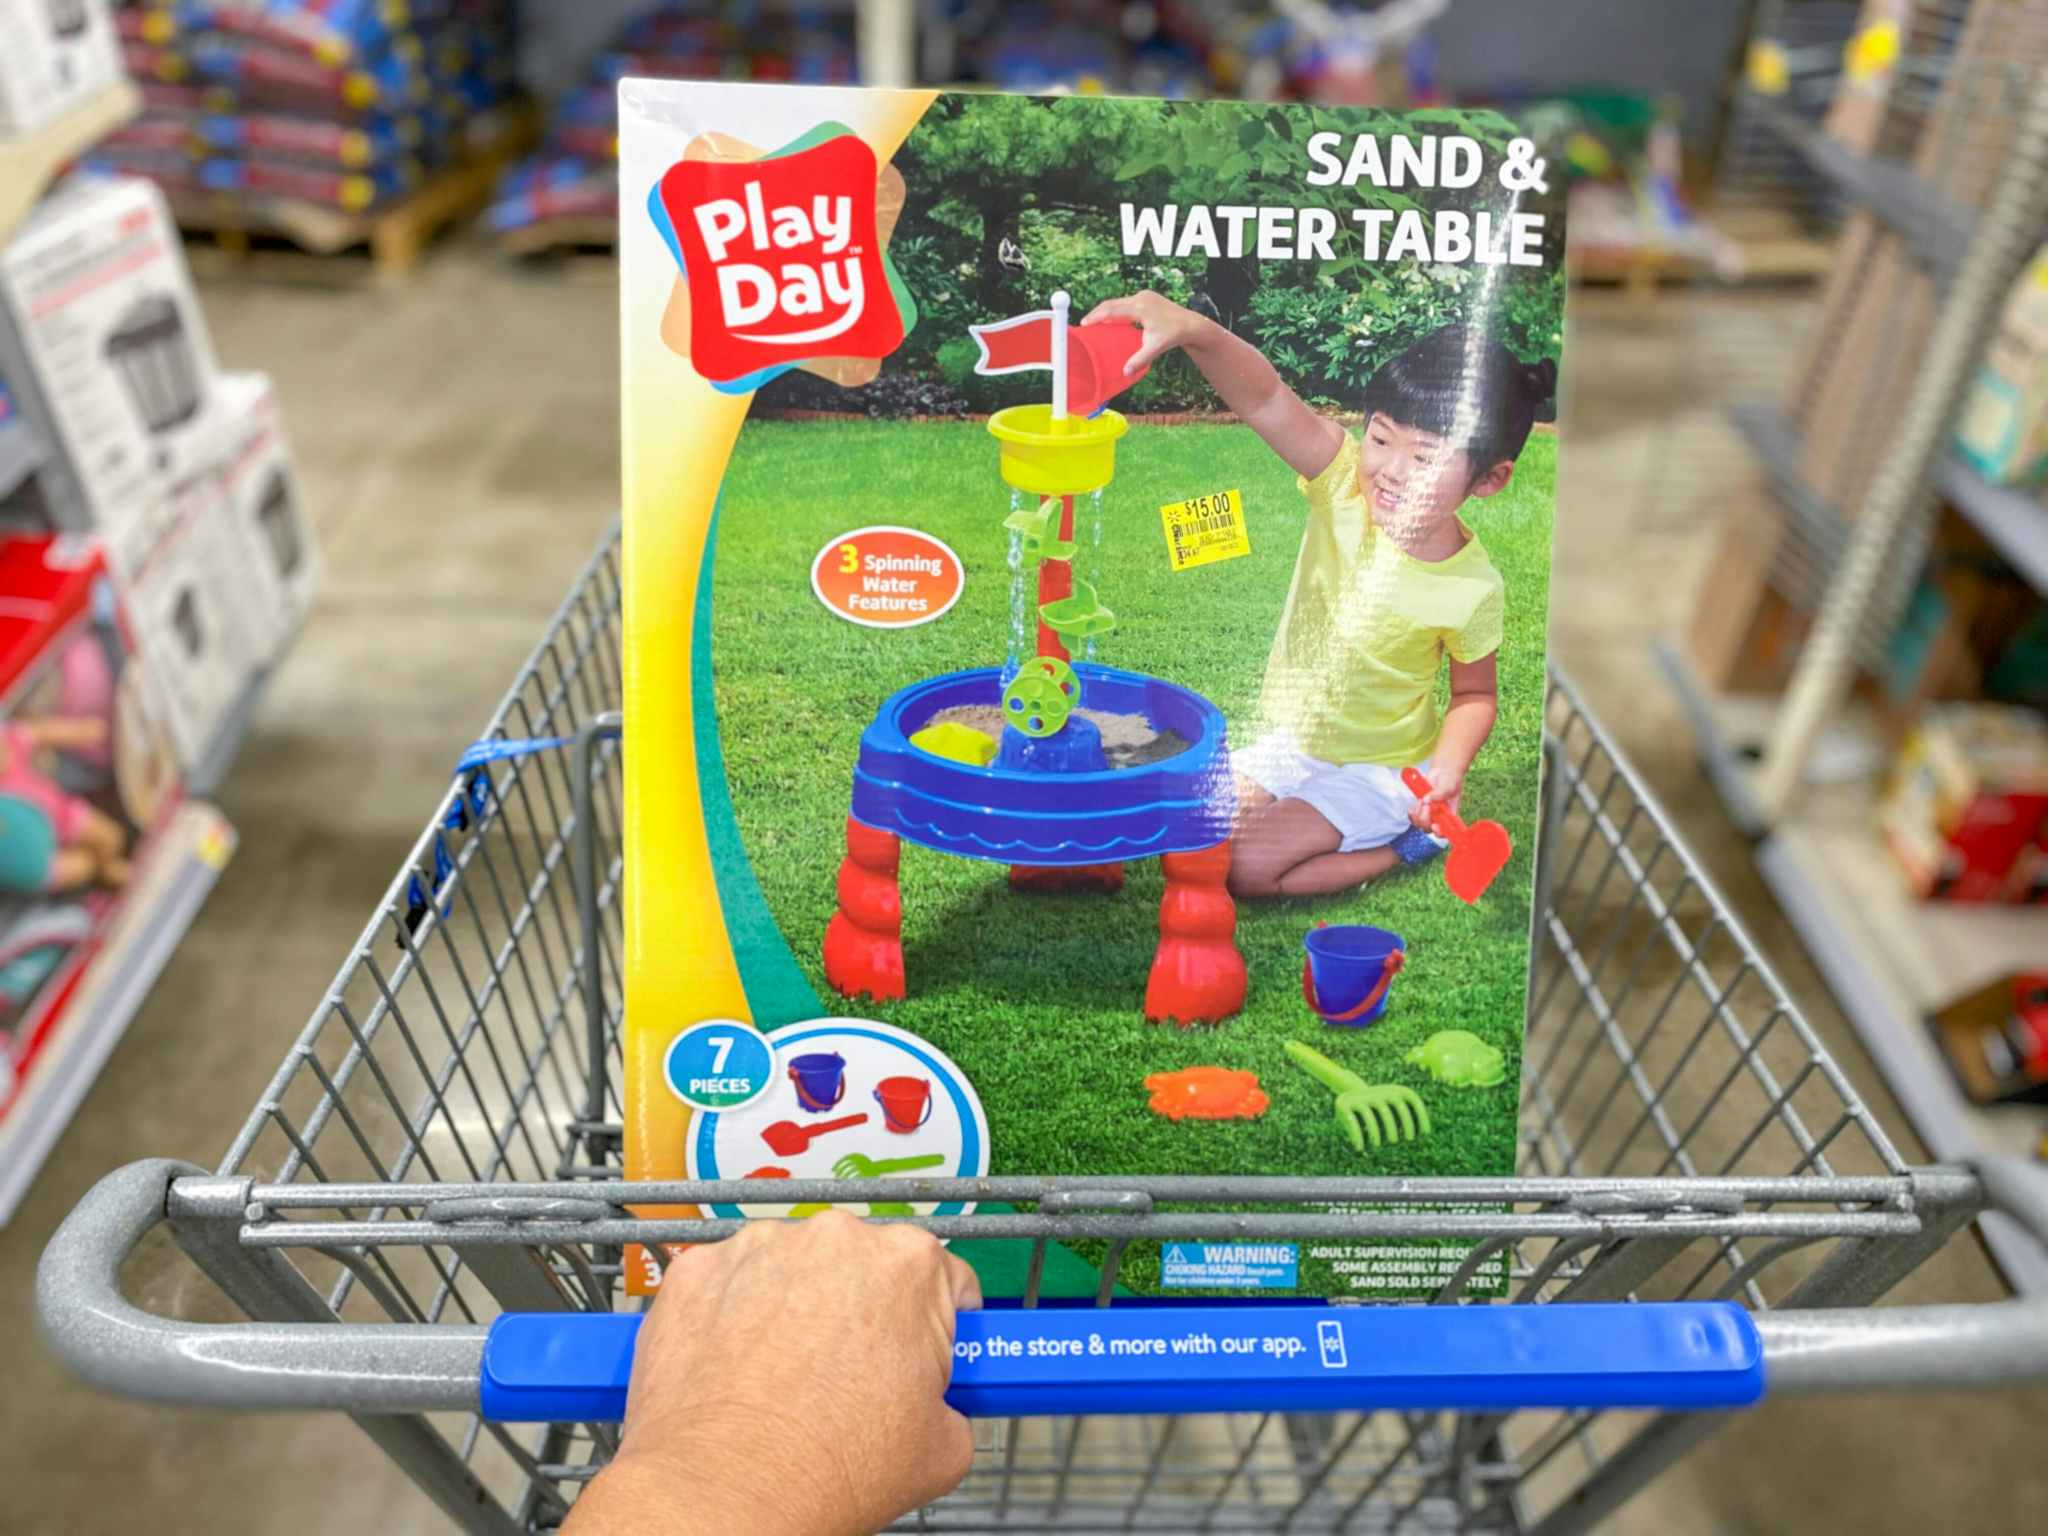 hand pushing walmart cart with play day sand and water table